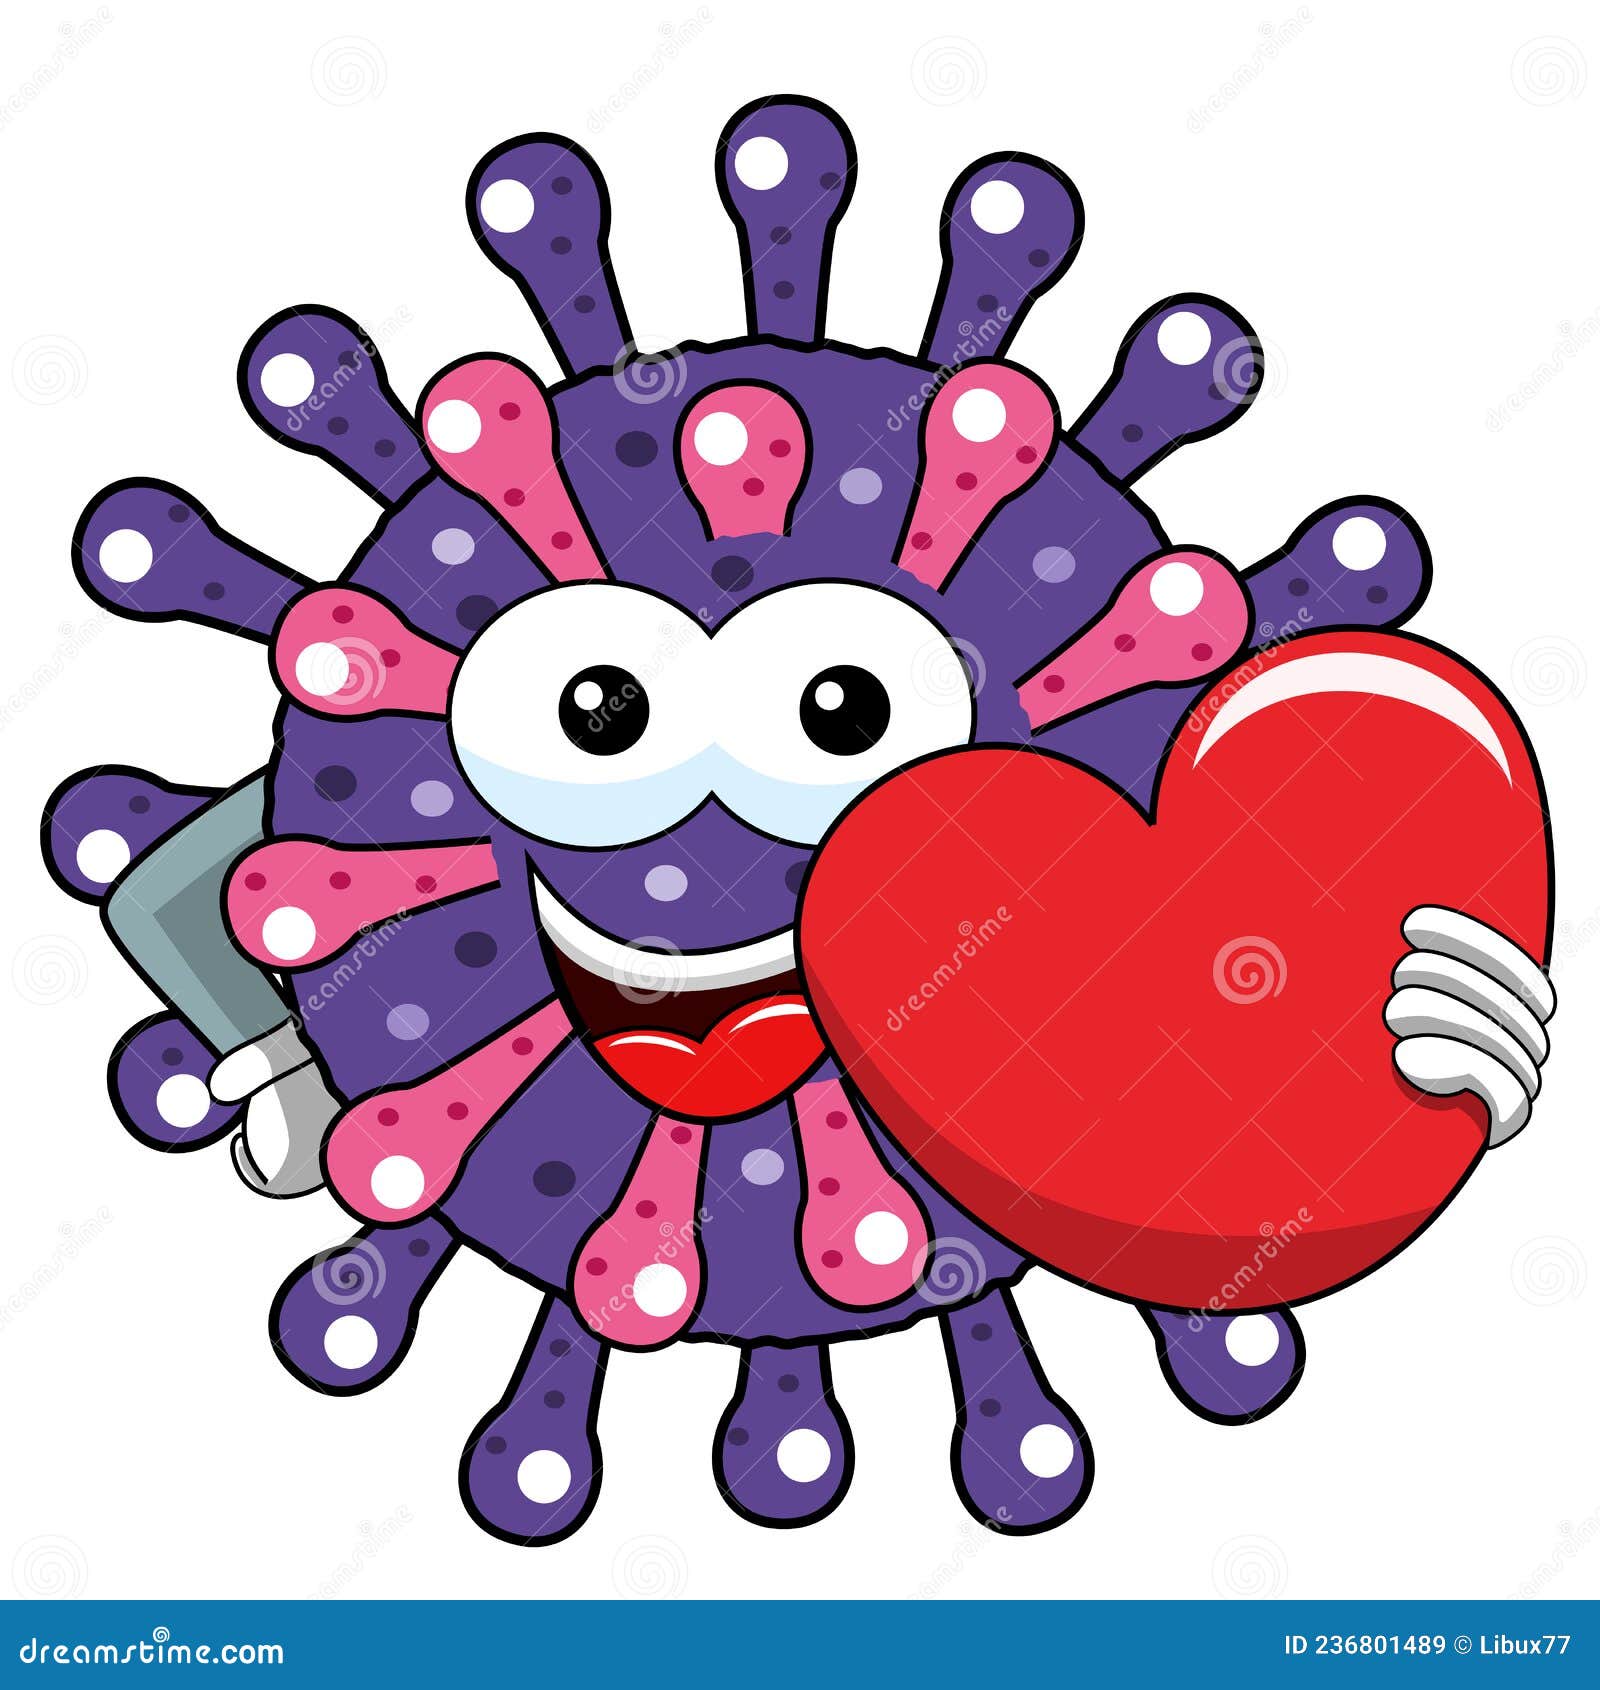 Cartoon Mascot Character Virus or Bacterium Heart Love Message Isolated ...